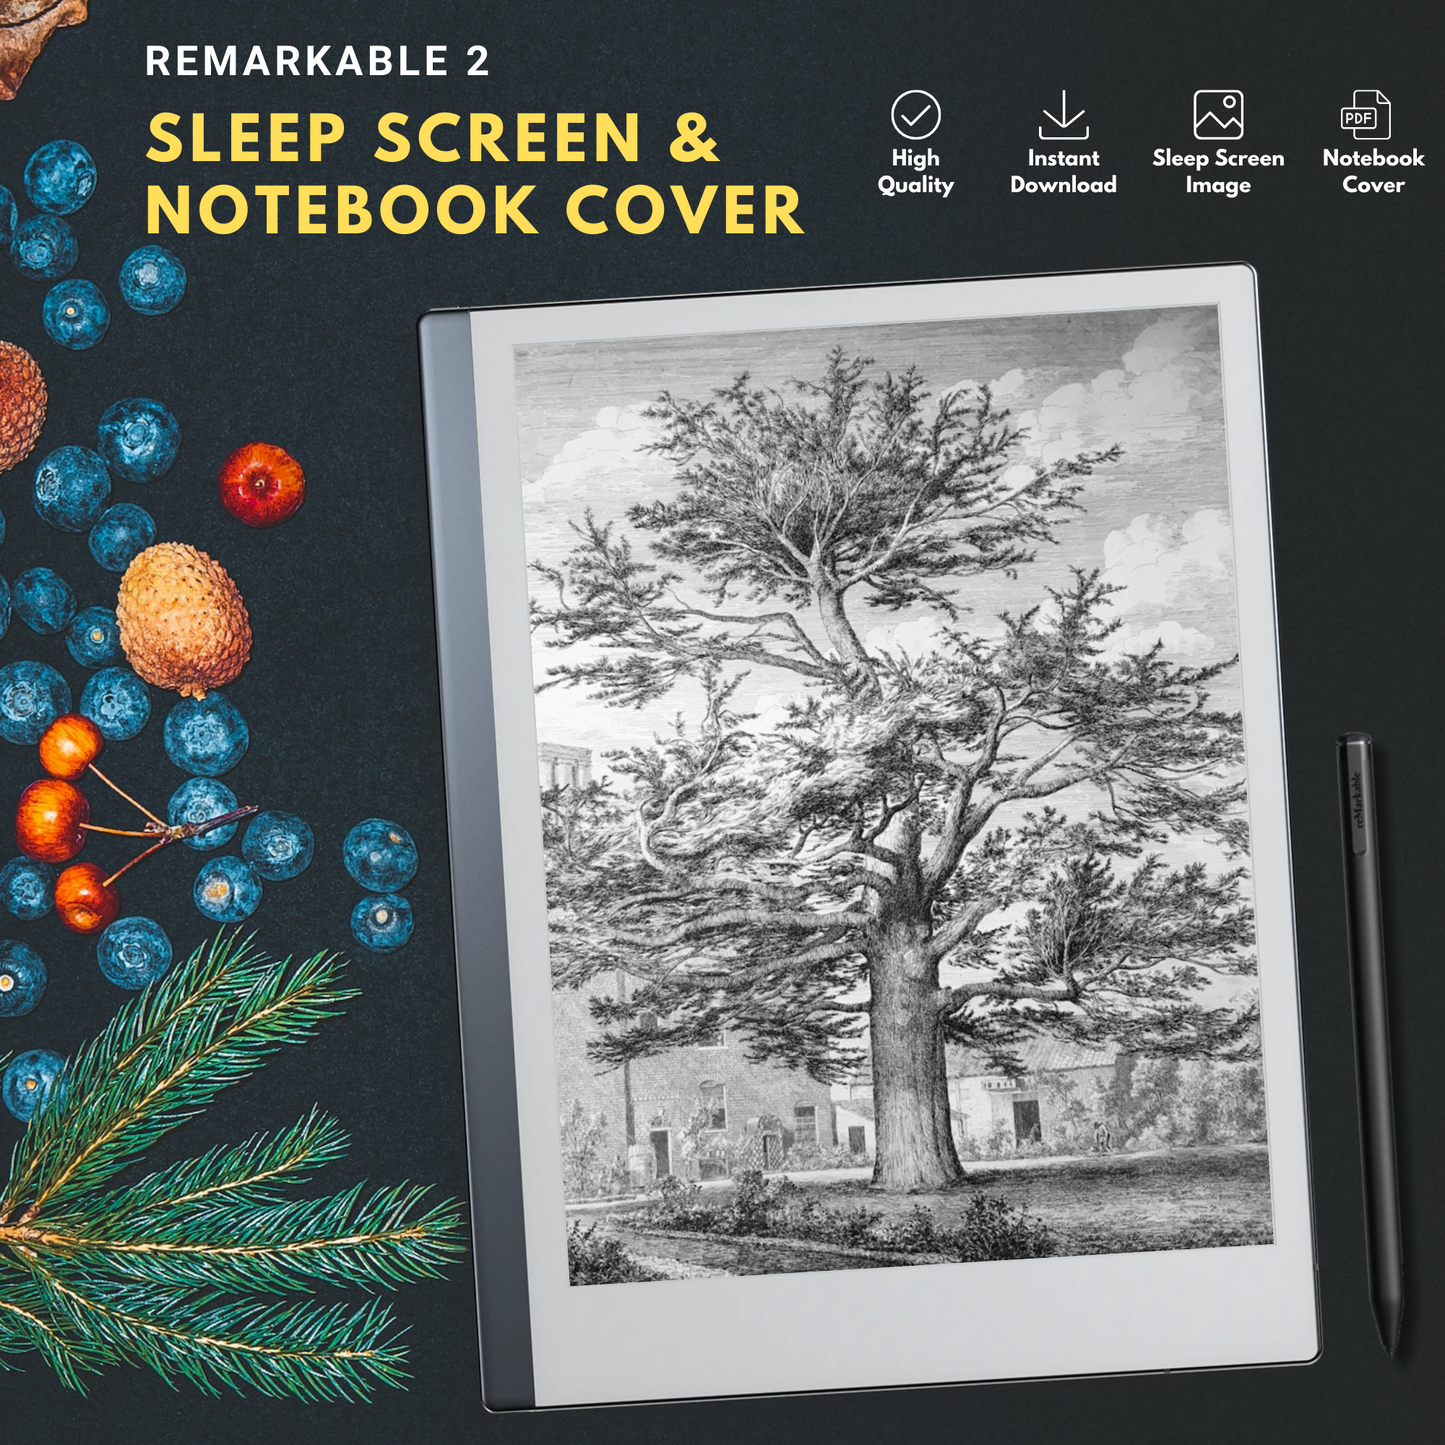 Remarkable 2 Sleep Screen & Notebook Cover Artwork - Handmade Tree Sketches with a Unique Touch